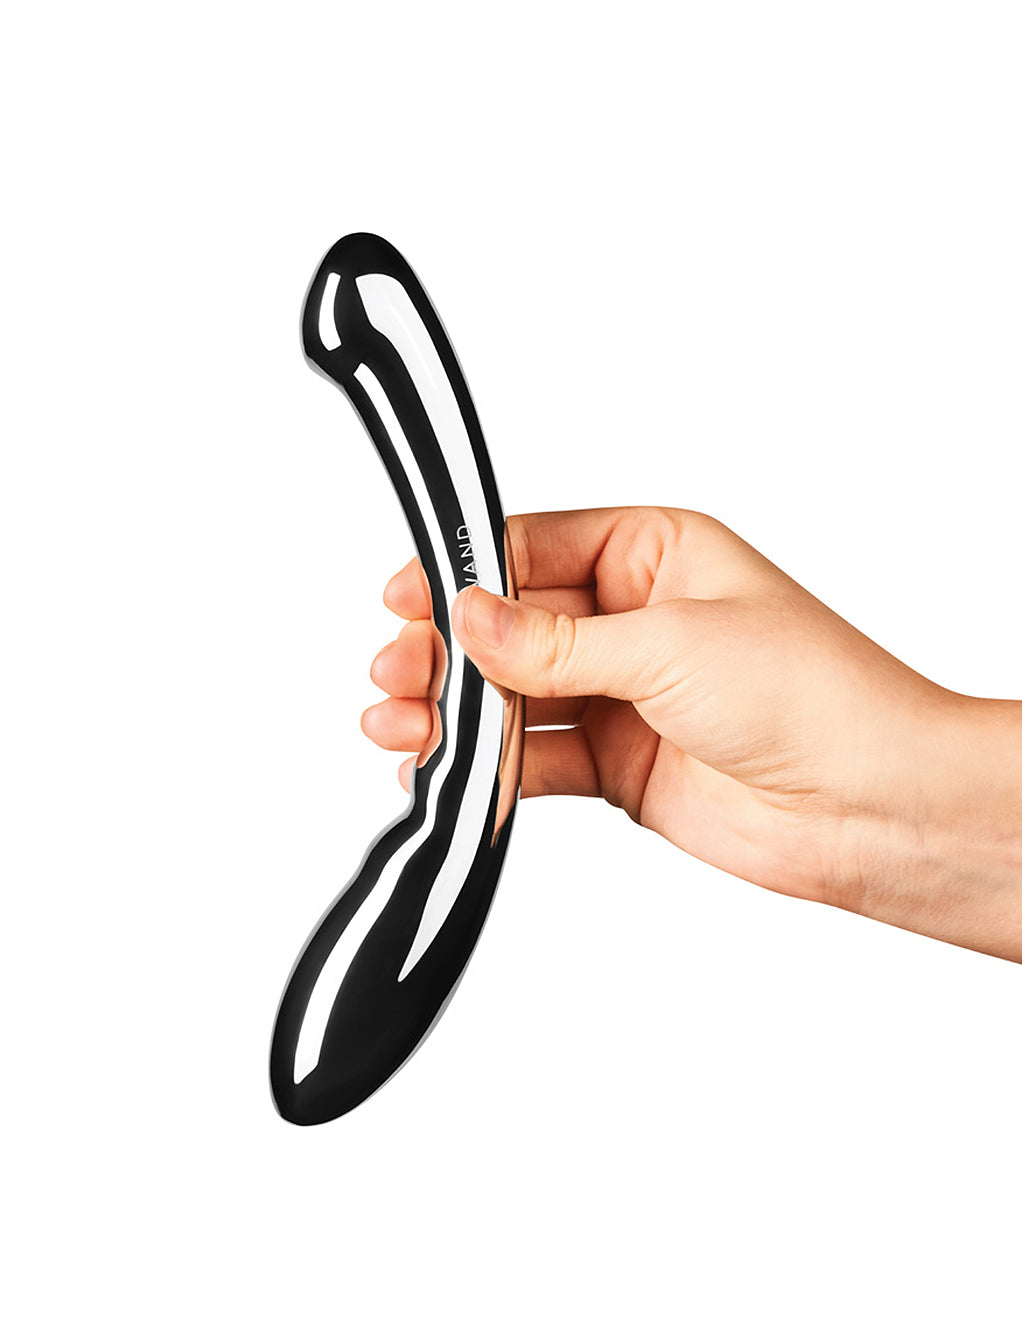 Le Wand Arch Stainless Steel Wand- in hand